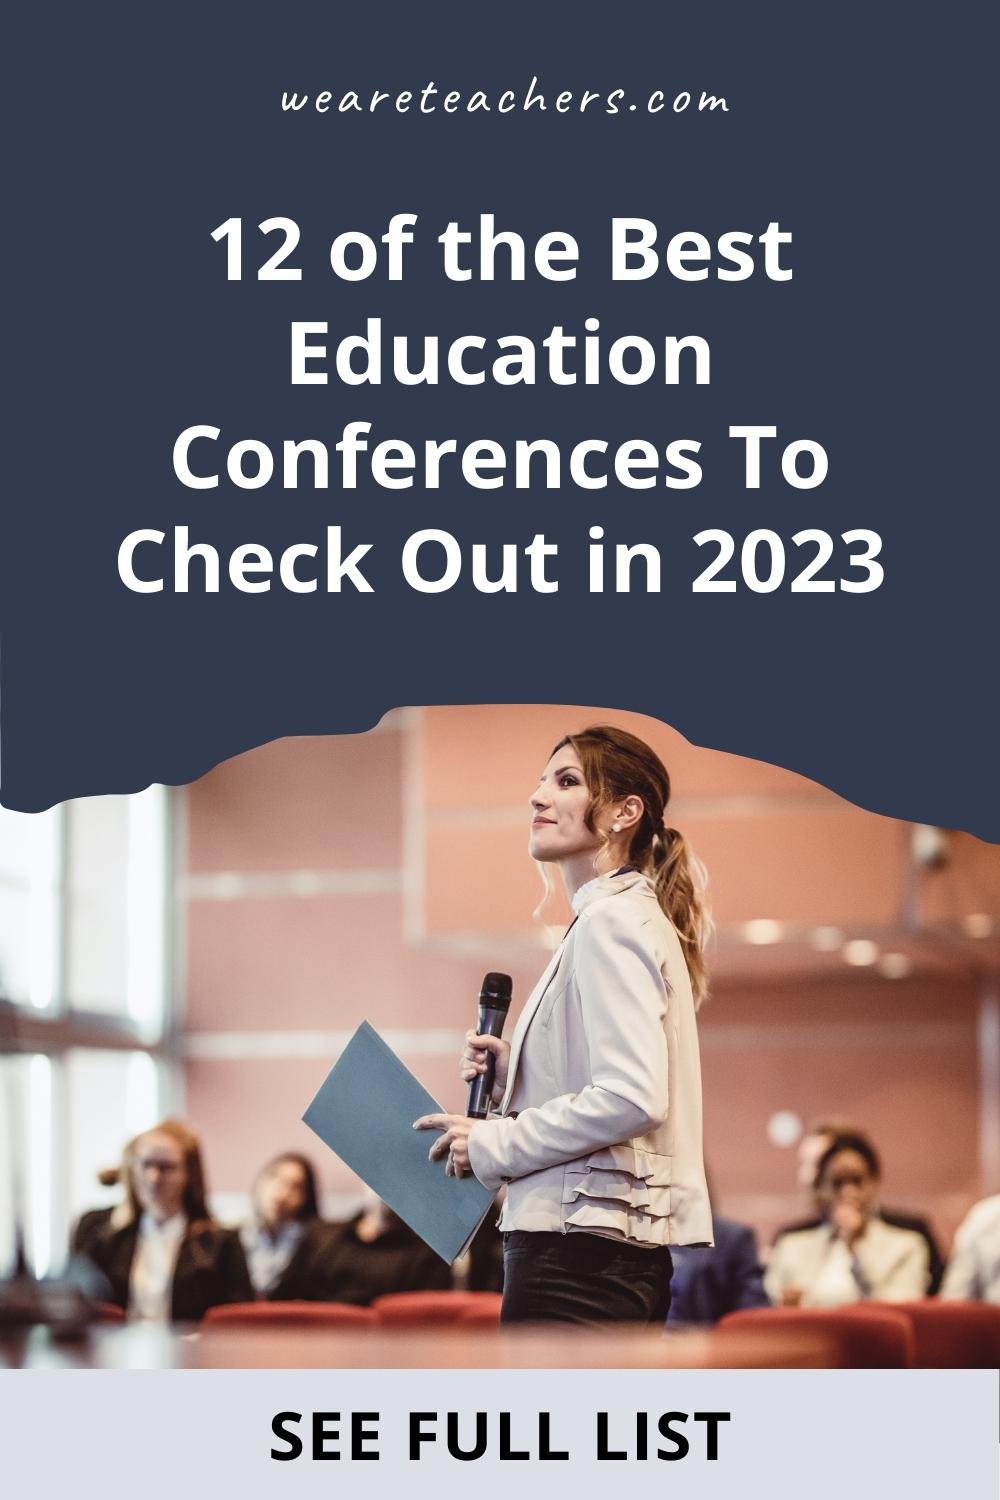 12 Best Education Conferences To Check Out in 2023